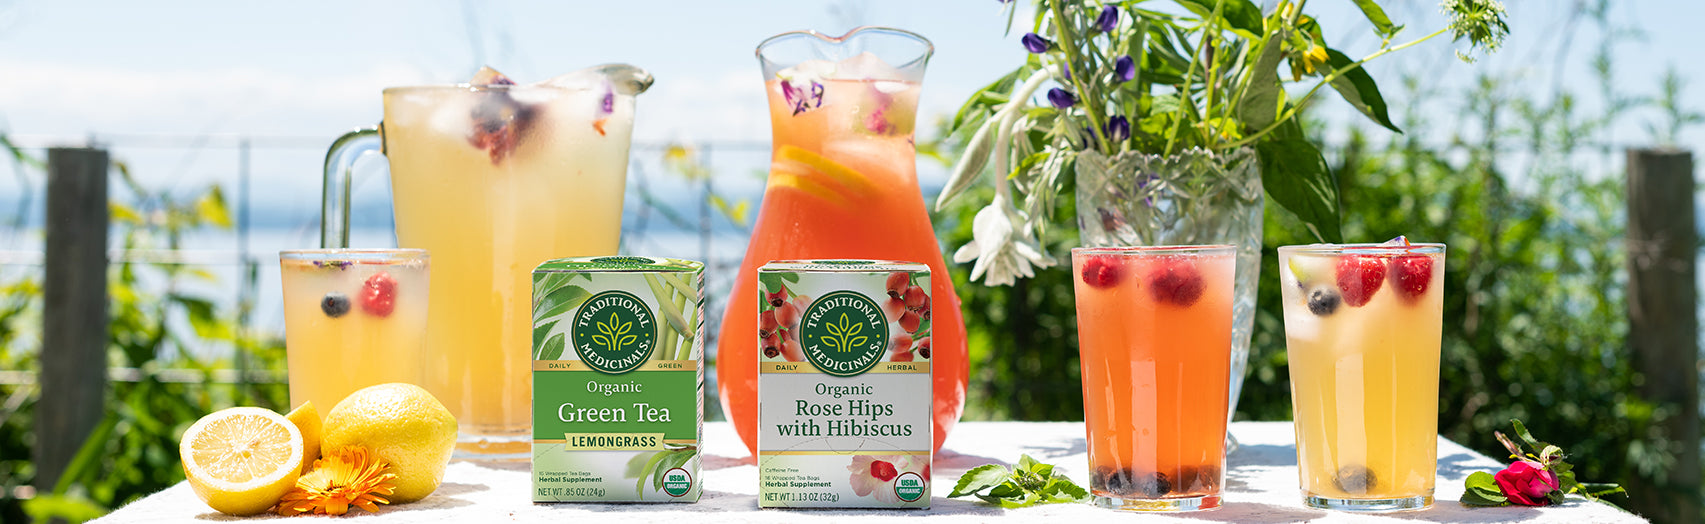 Herbal lemonade in pitchers and glasses with Green Tea Lemongrass and Rose Hips with Hibiscus cartons on table